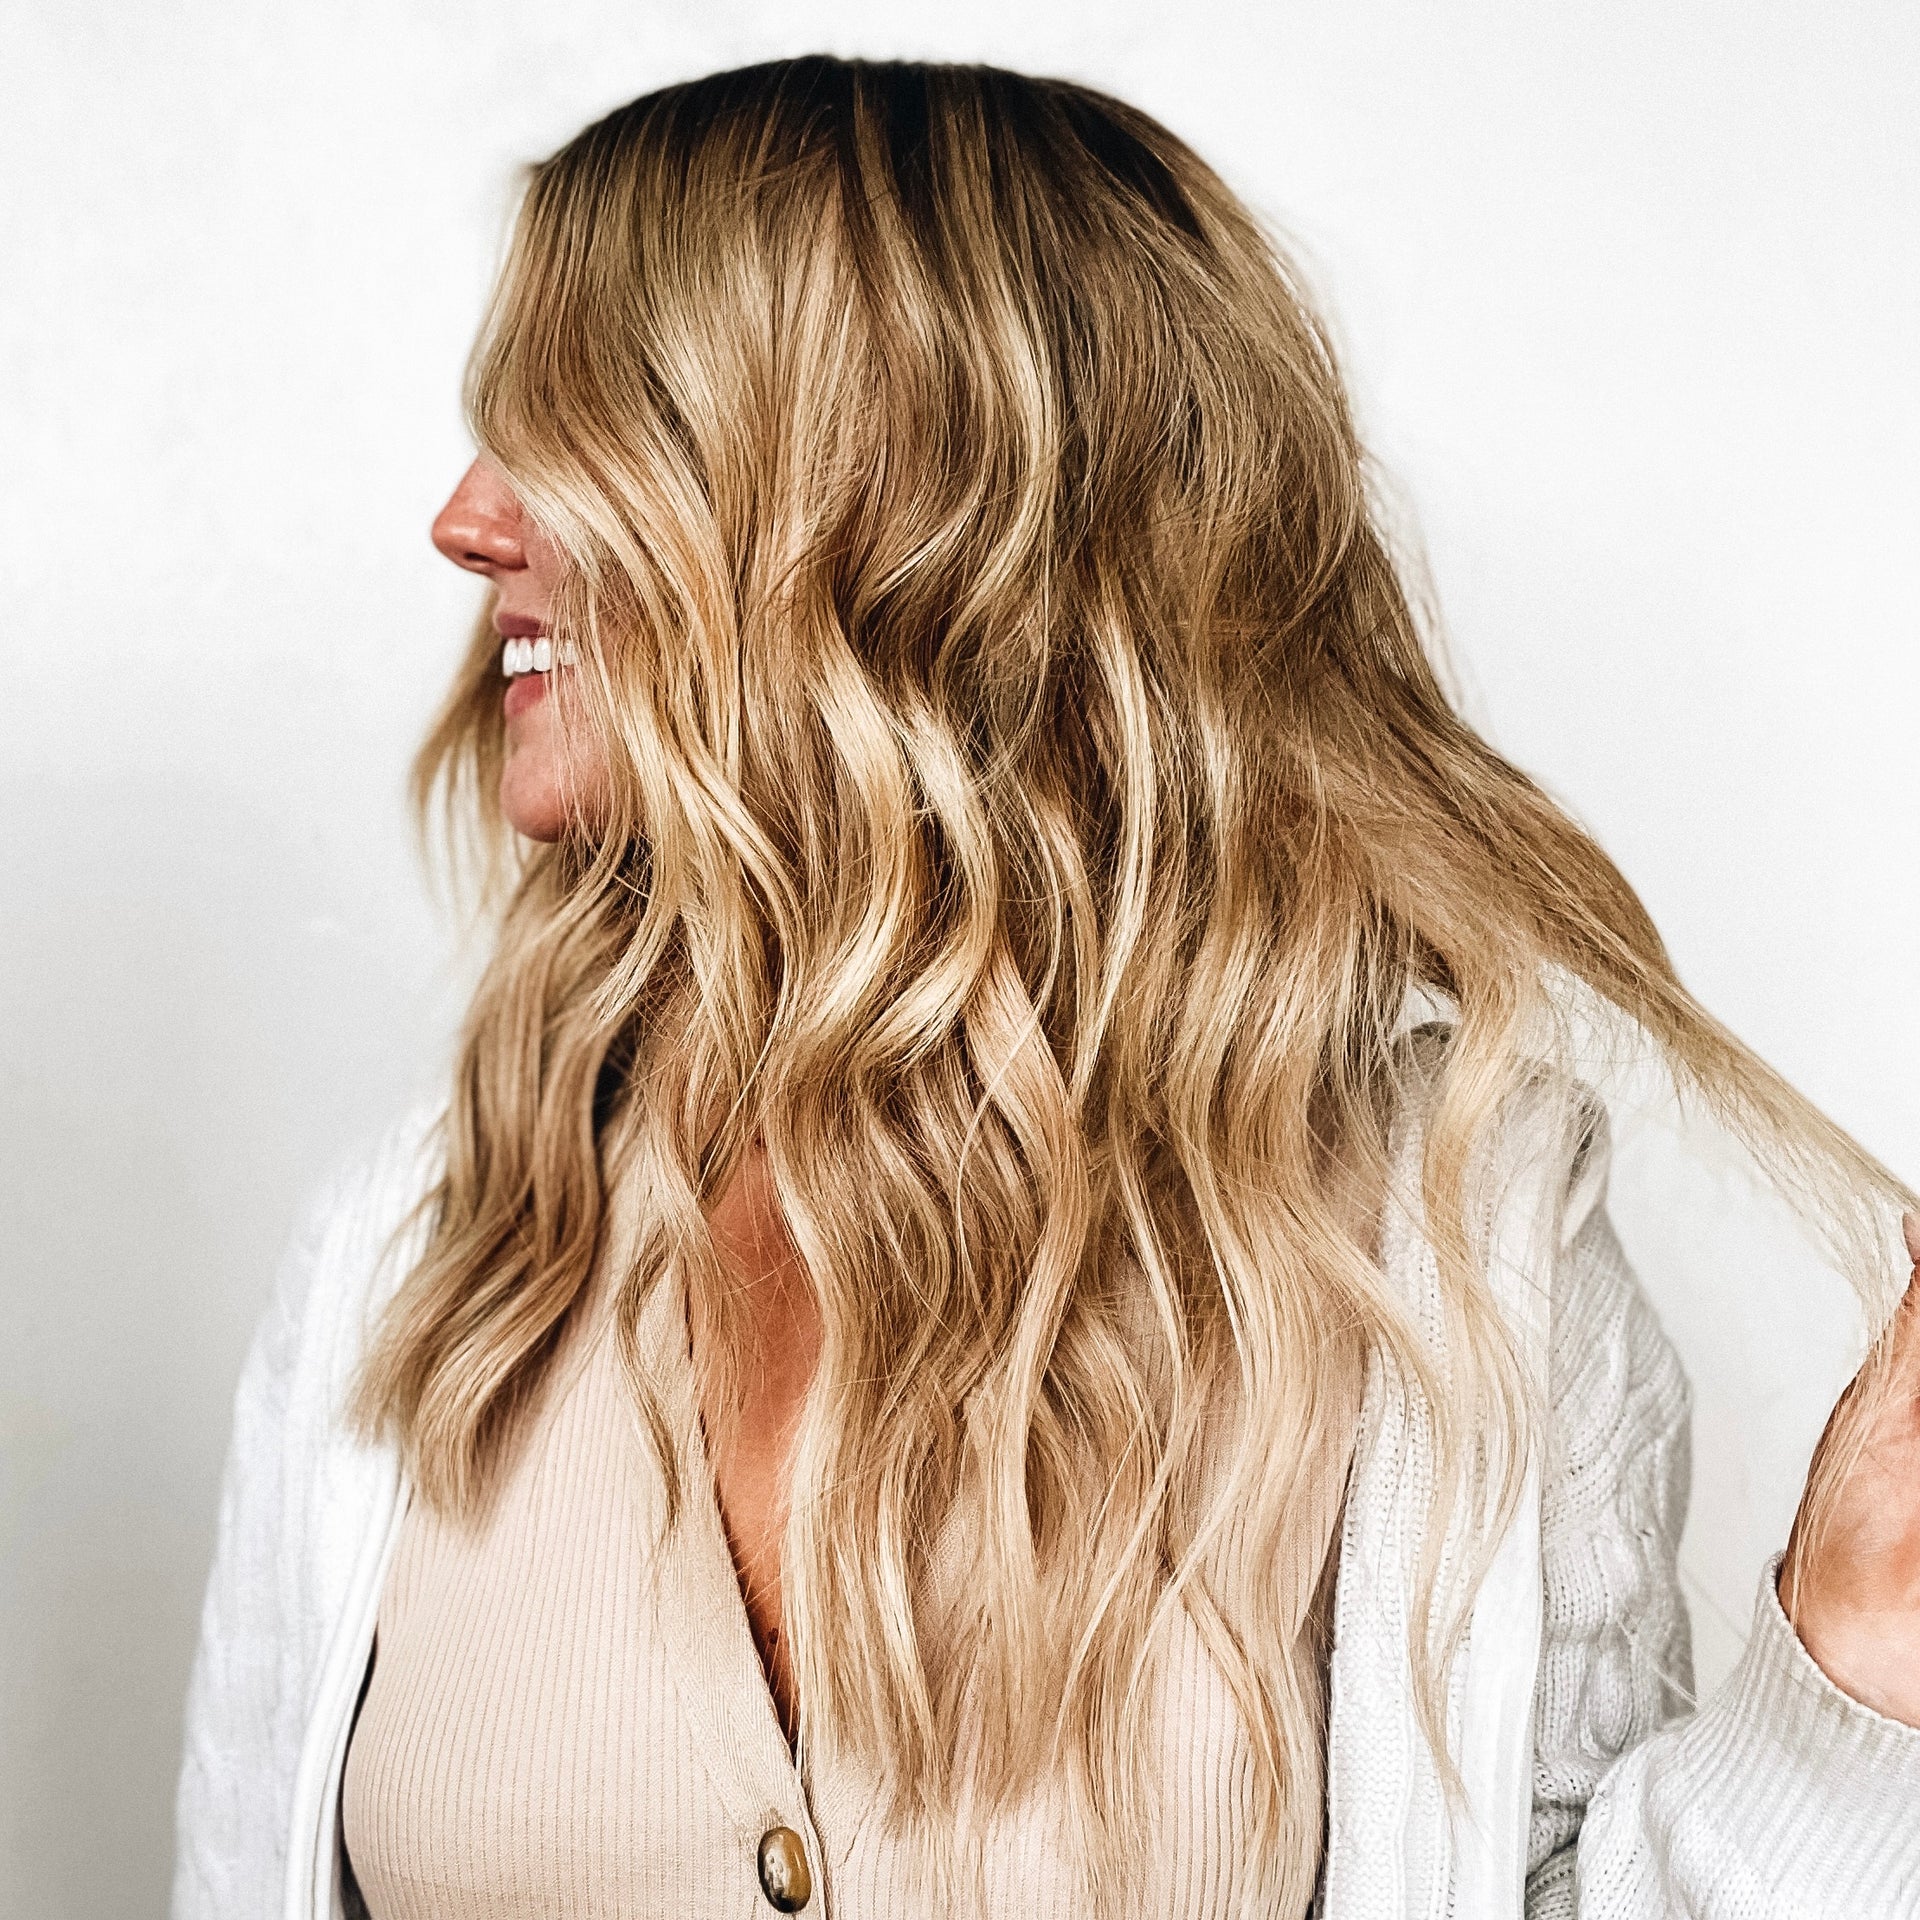 How Hair Extensions Can Heal Your Hair